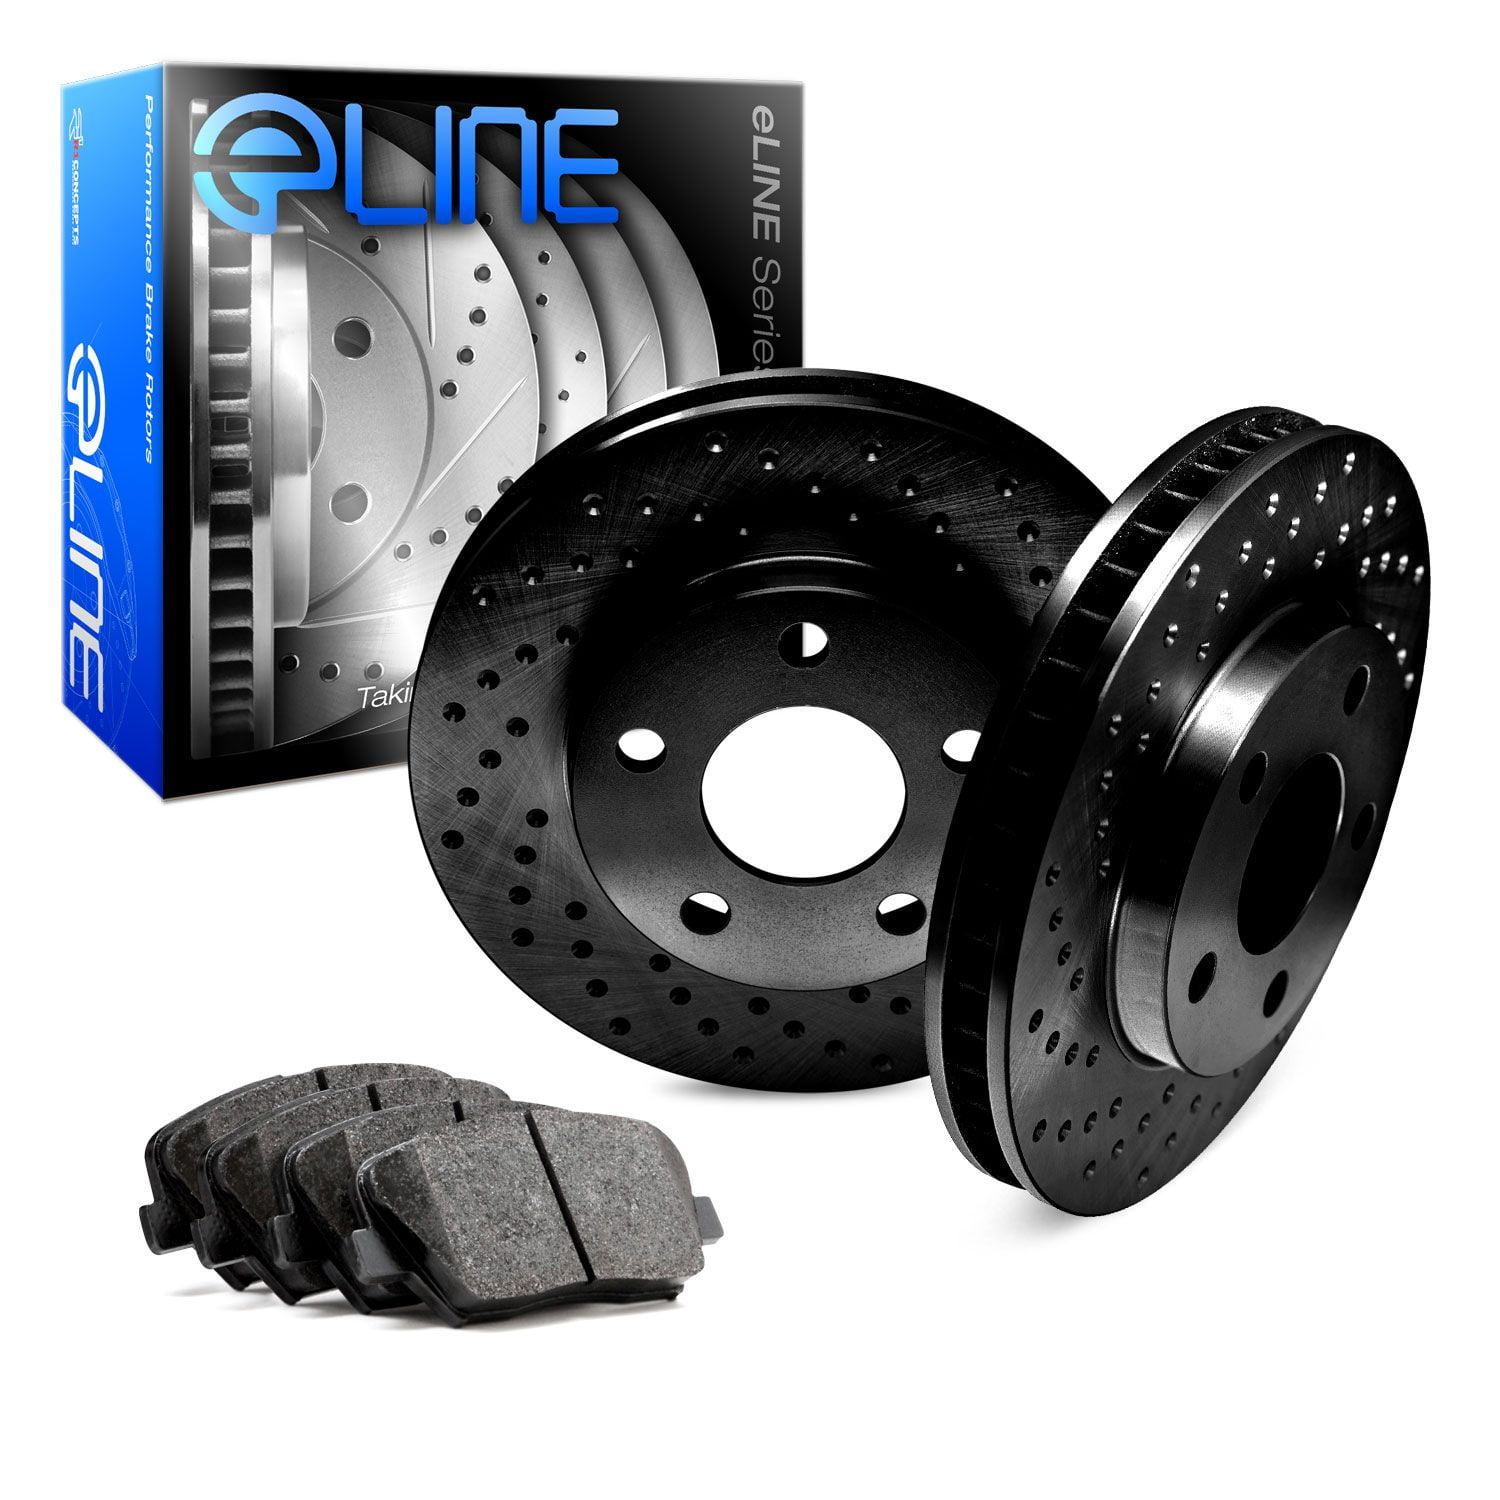 Frontier Front Rear Black Drilled Brake Rotors+Ceramic Pads Fit Nissan Xterra